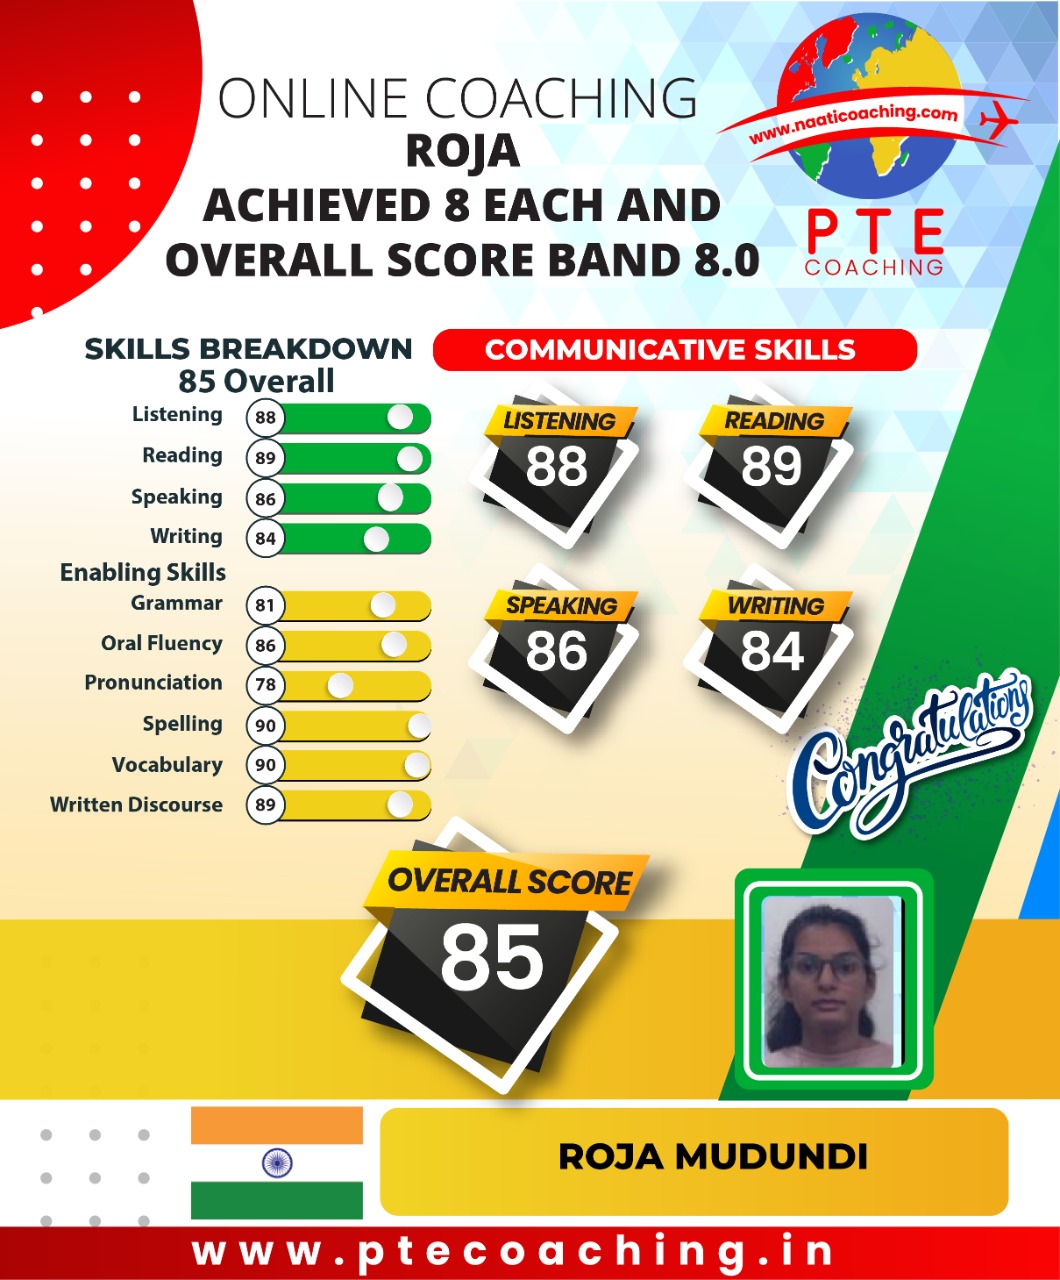 PTE Coaching Scorecard - Roja achieved achieved 8 and overall score band 8.0